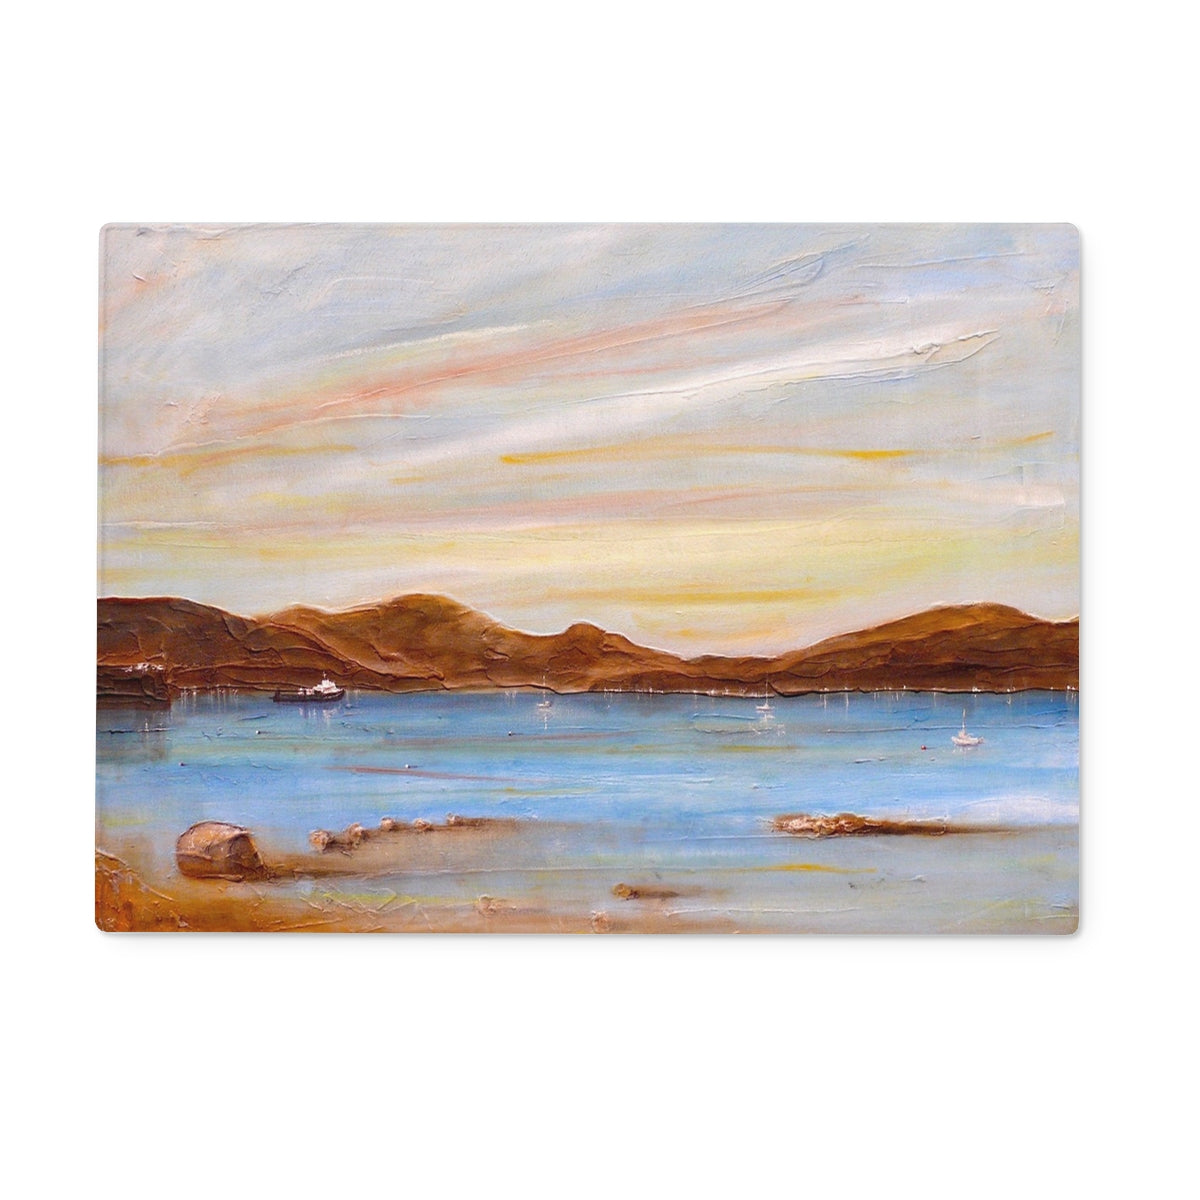 The Last Ferry To Dunoon Art Gifts Glass Chopping Board-Glass Chopping Boards-River Clyde Art Gallery-15"x11" Rectangular-Paintings, Prints, Homeware, Art Gifts From Scotland By Scottish Artist Kevin Hunter